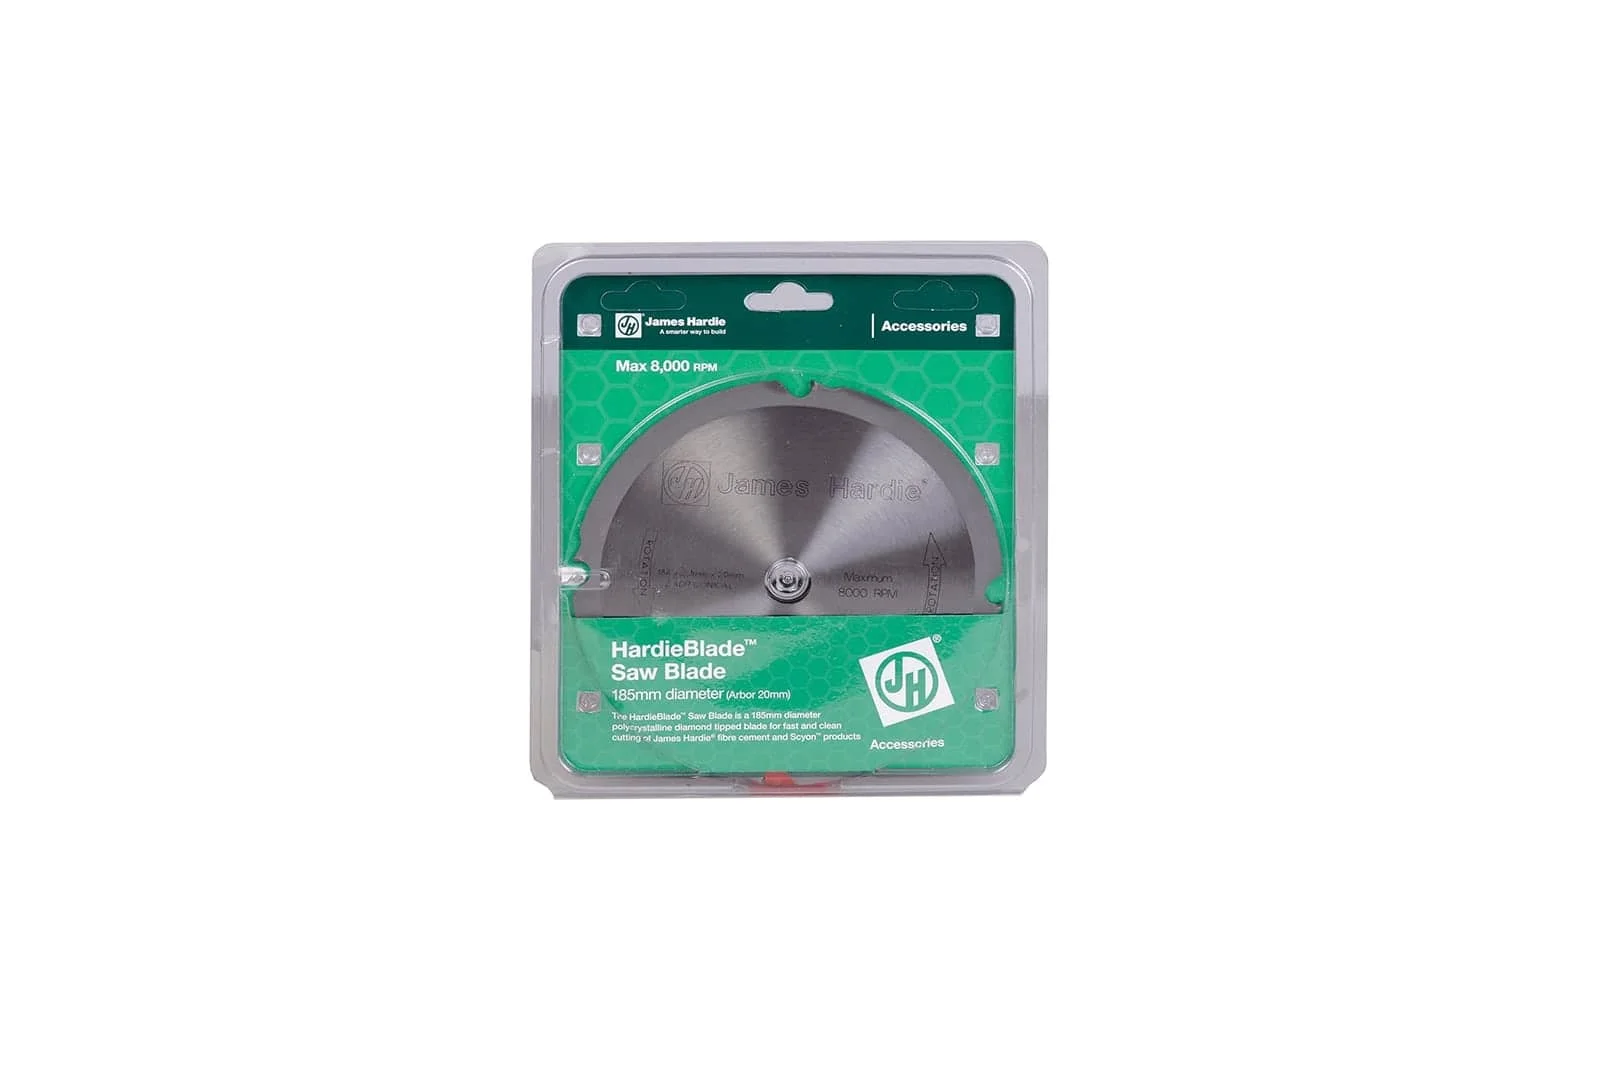 Hardie™ Blade Saw Blade with a diameter of 185mm 